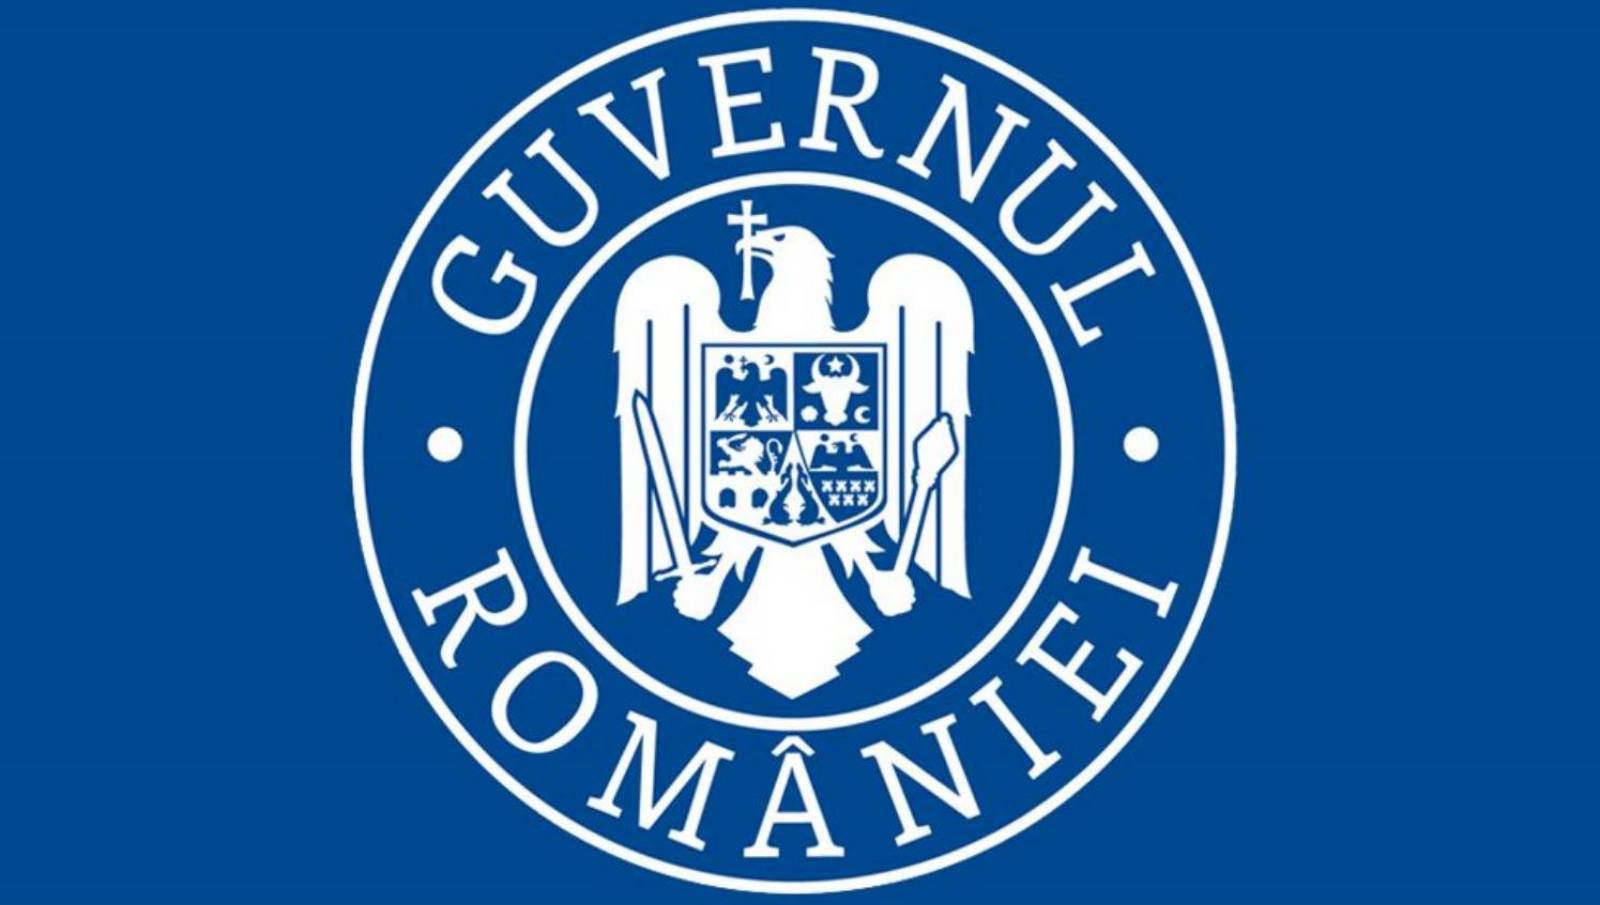 The Romanian government decided in October